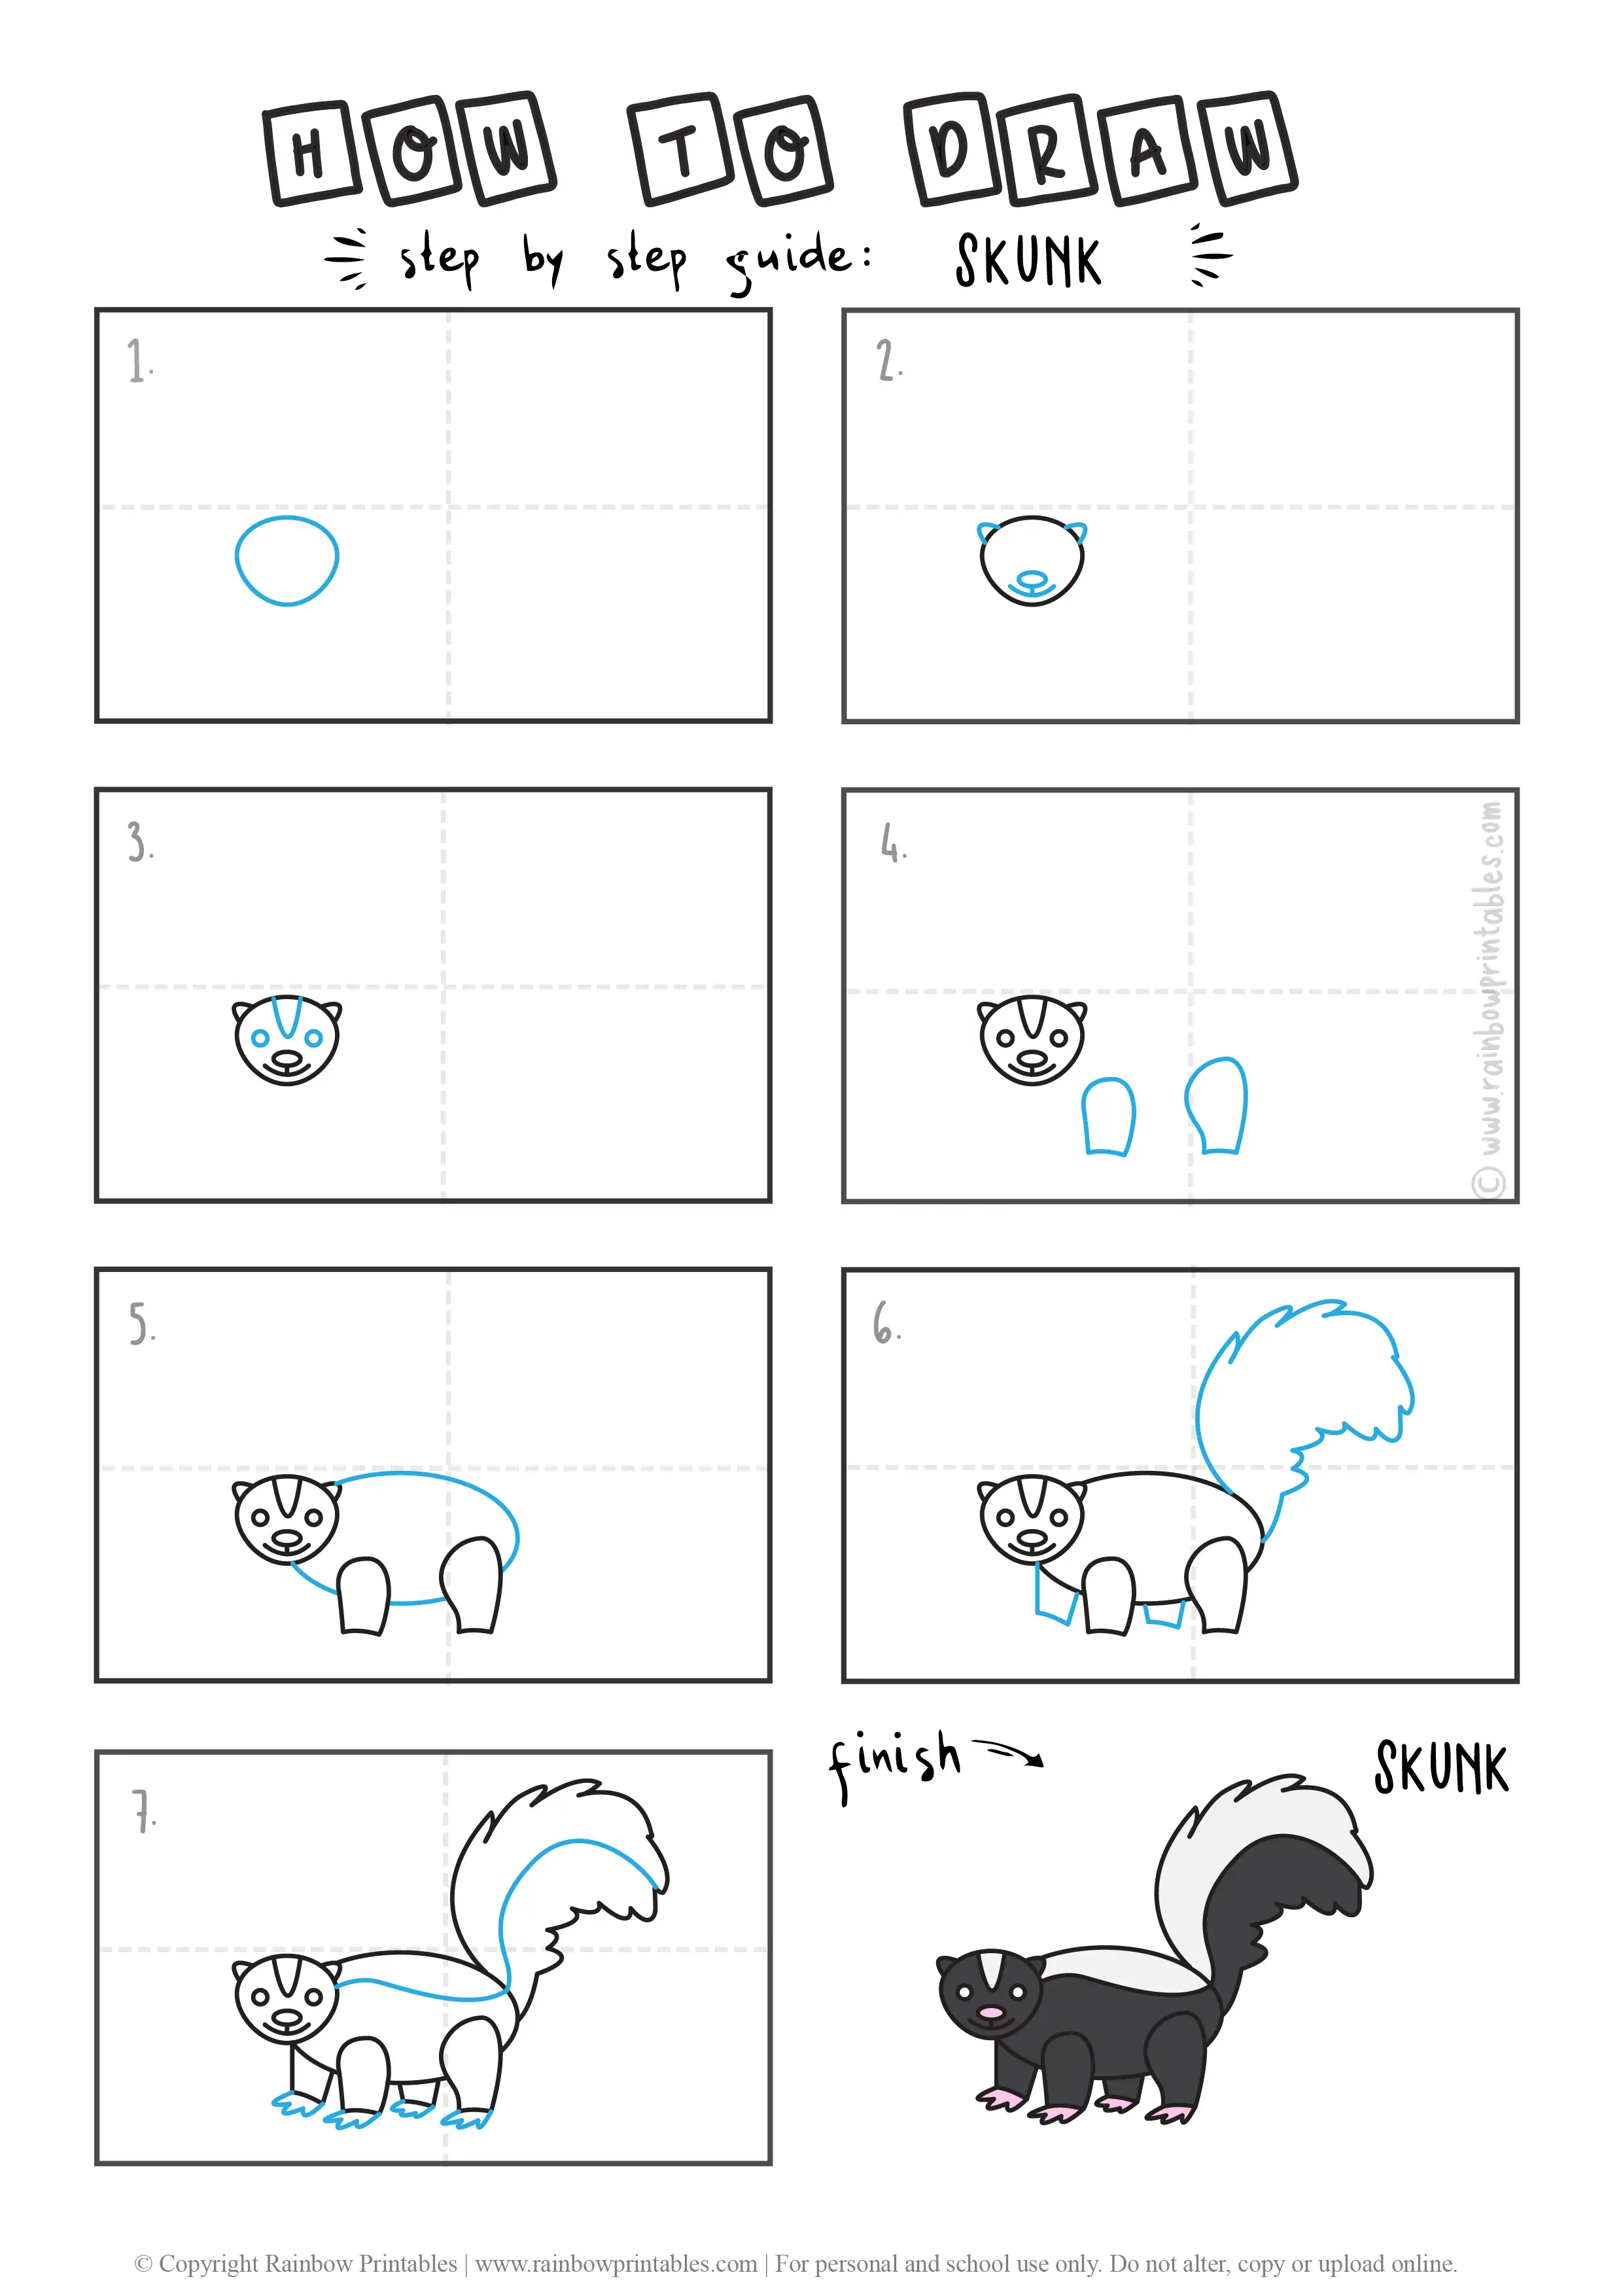 How To Draw an Easy & Cute Little Skunk Step By Step Guide For Kids